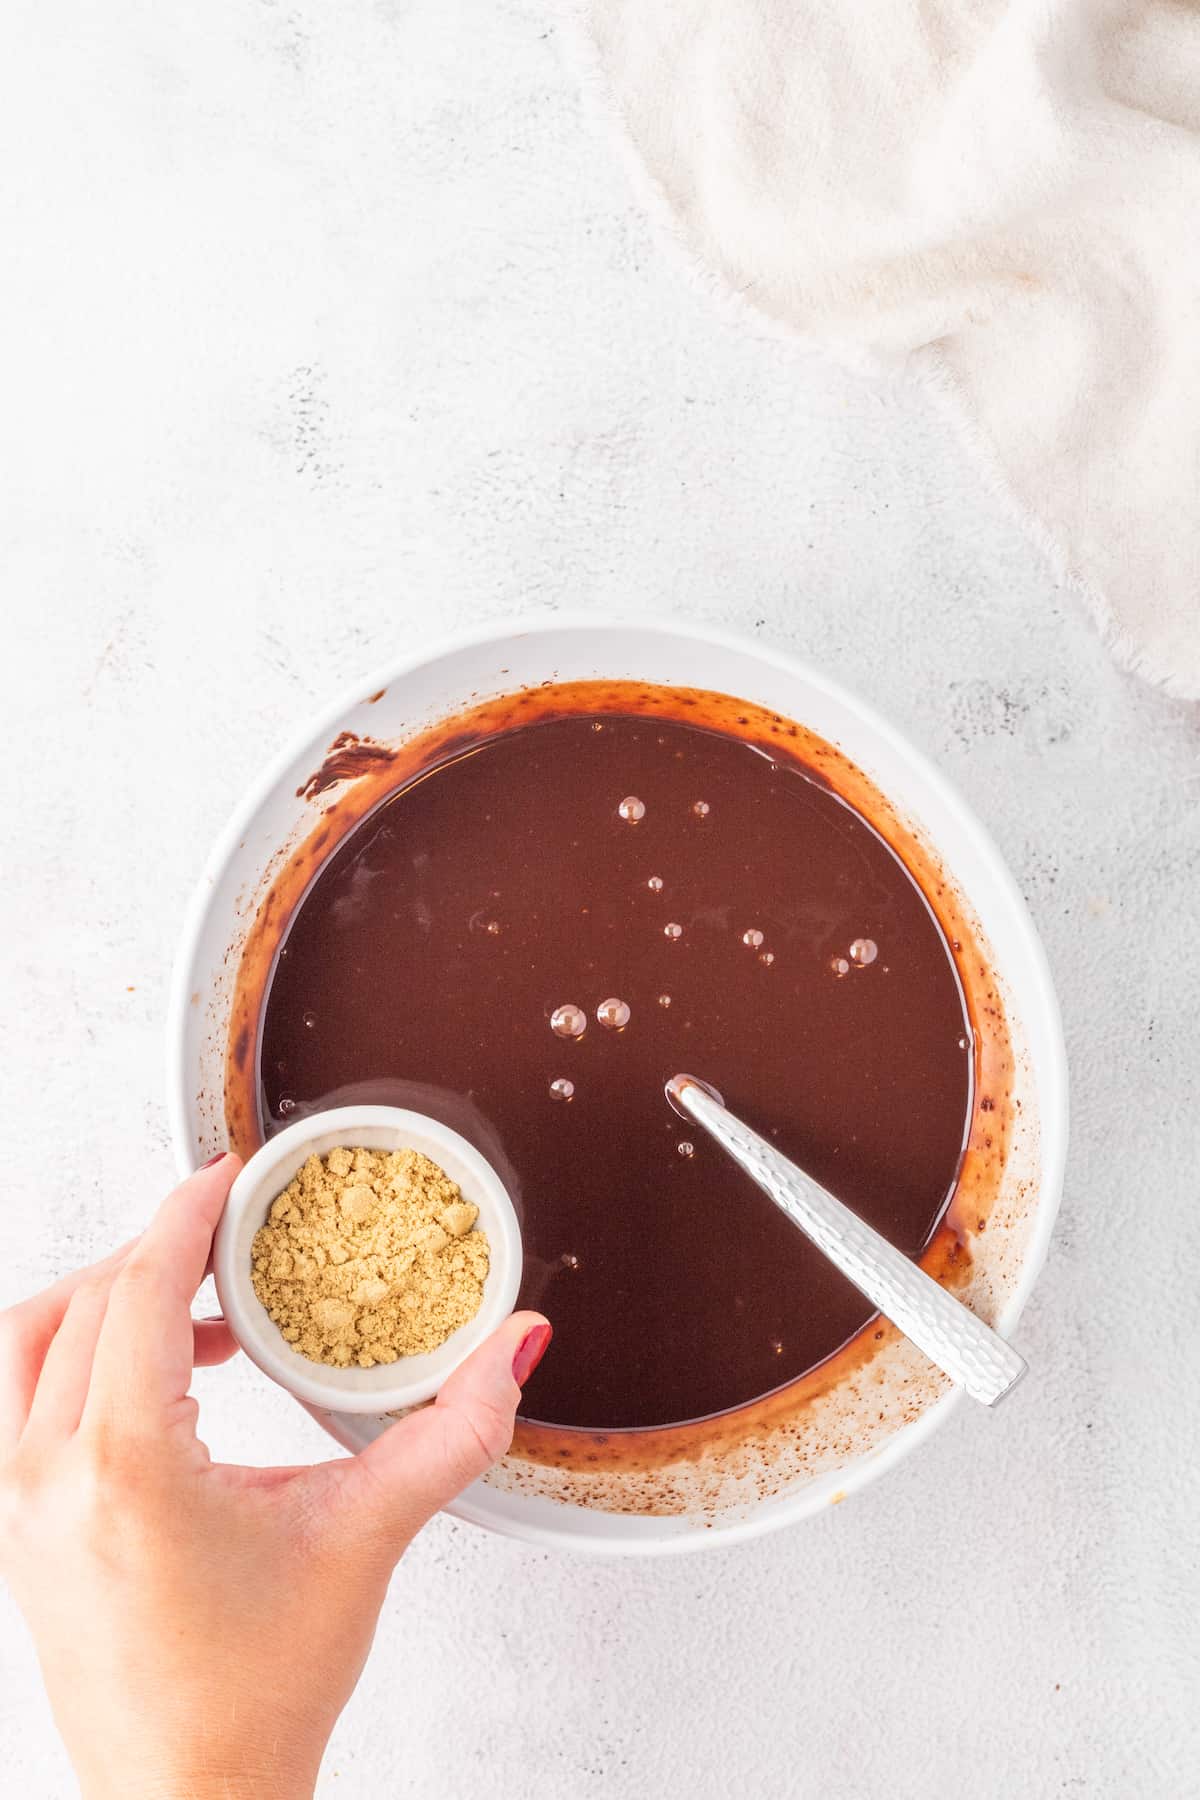 A person holding a bowl of chocolate sauce, preparing a Gingerbread Chocolate Caramel Tart Recipe.